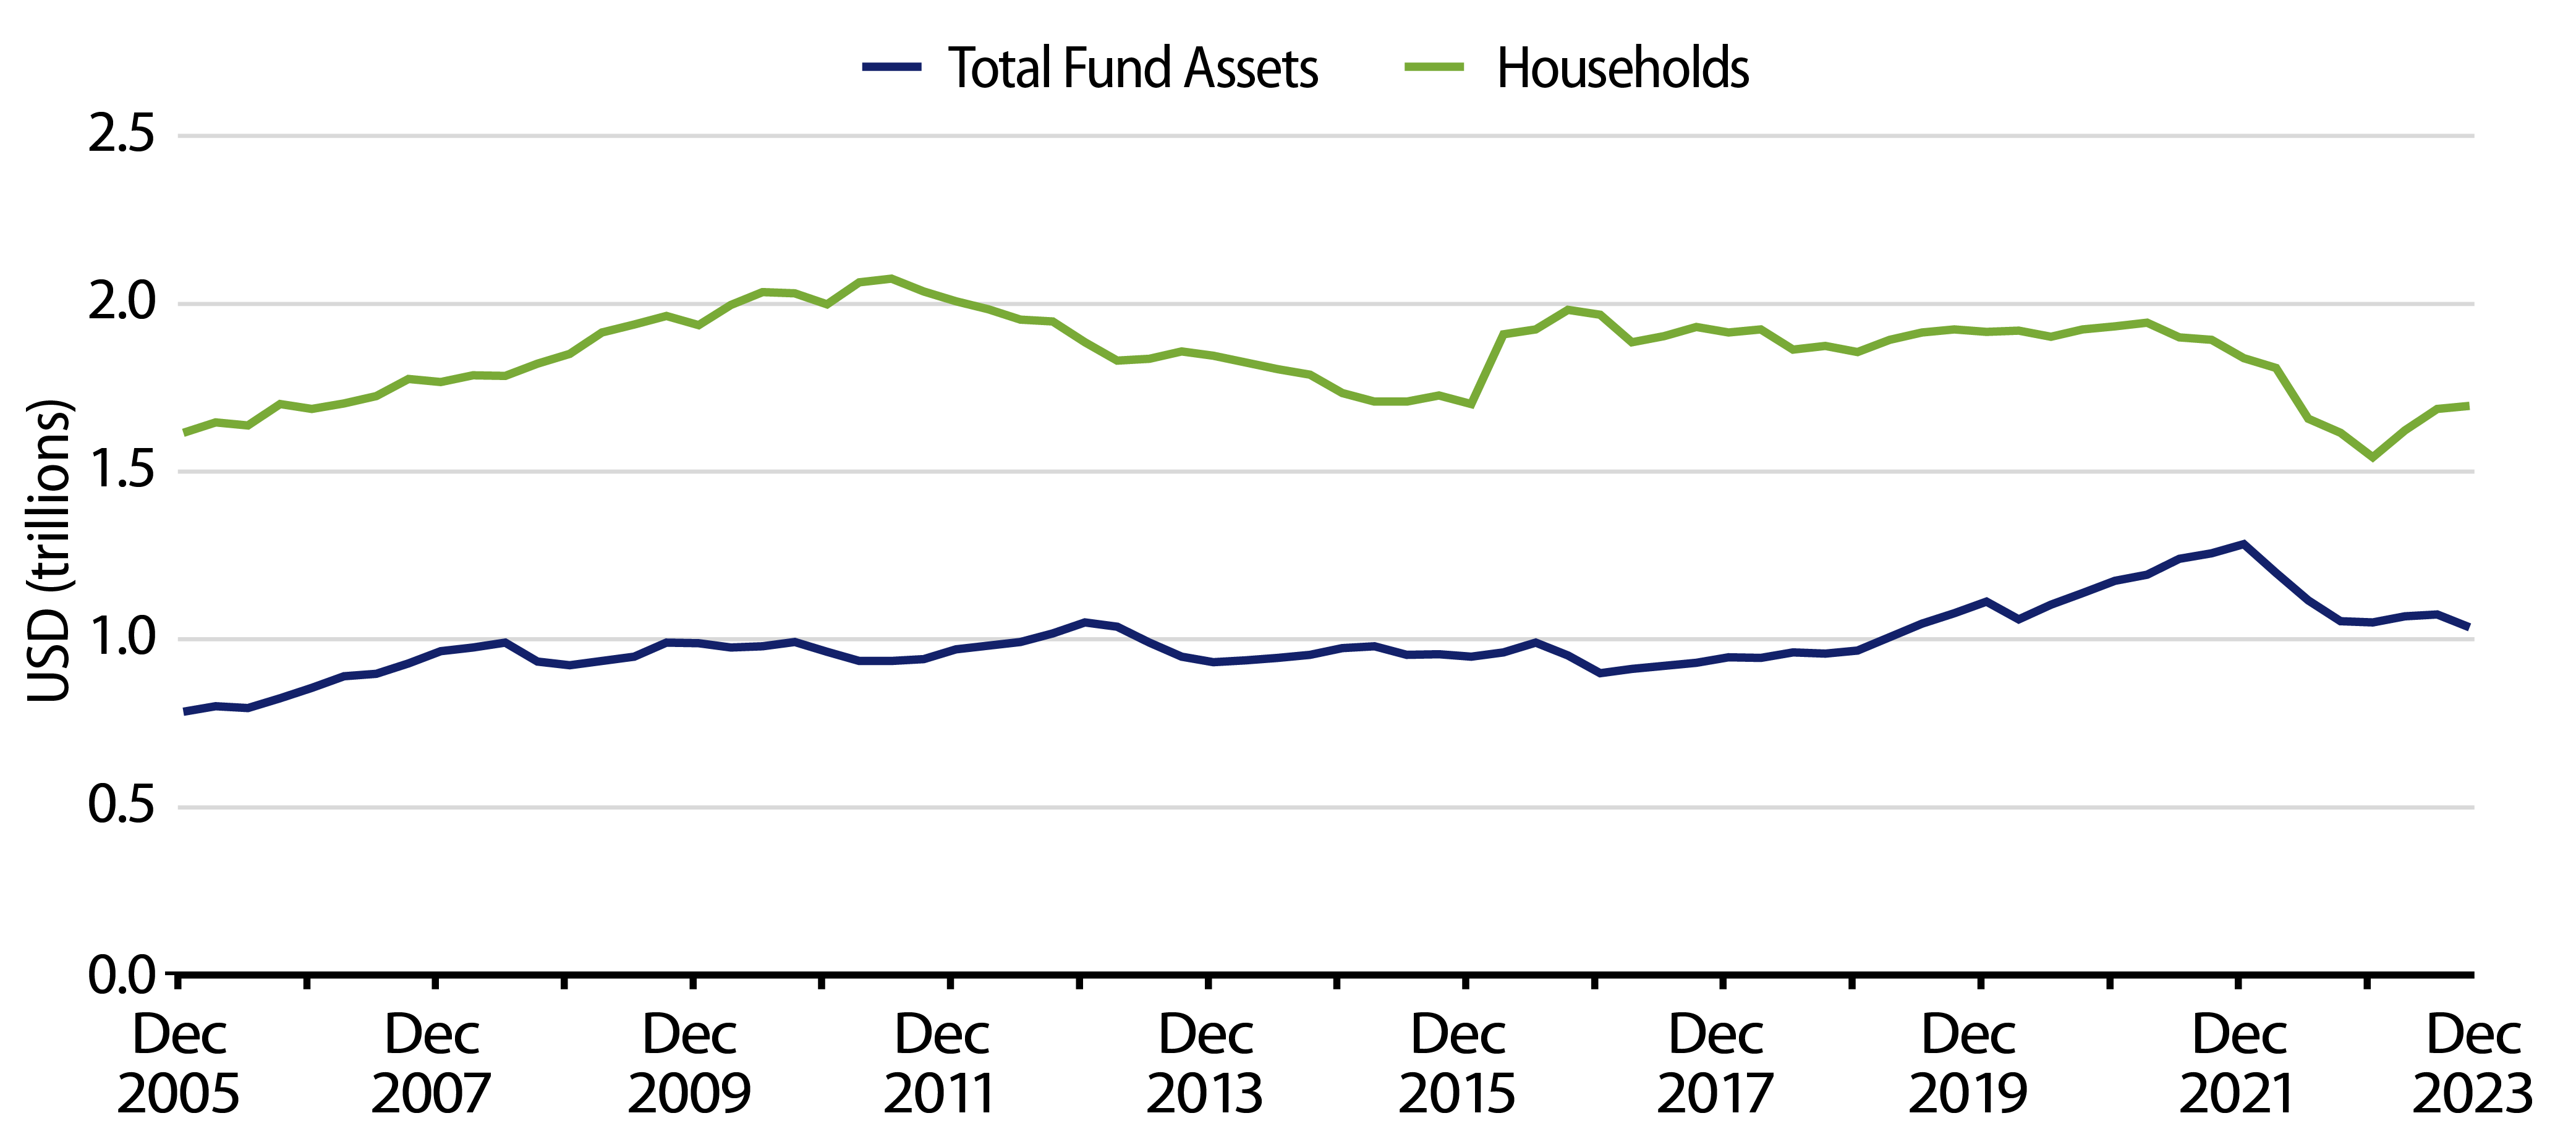 Explore Individual Holders (Household and Fund Assets)